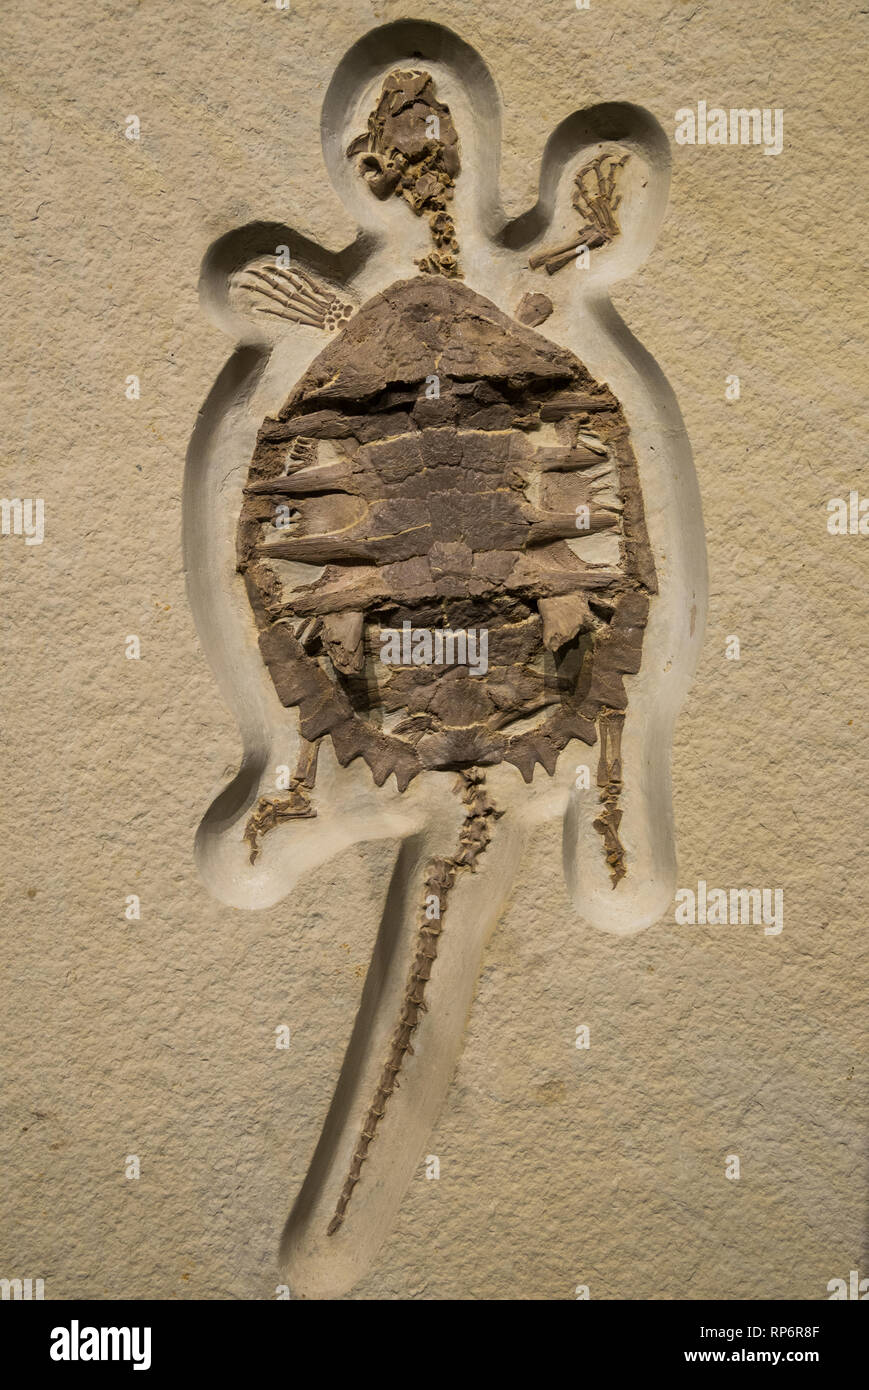 Fossil turtle of Eocene age. The Field Museum. Chicago, Illinois, USA. Stock Photo